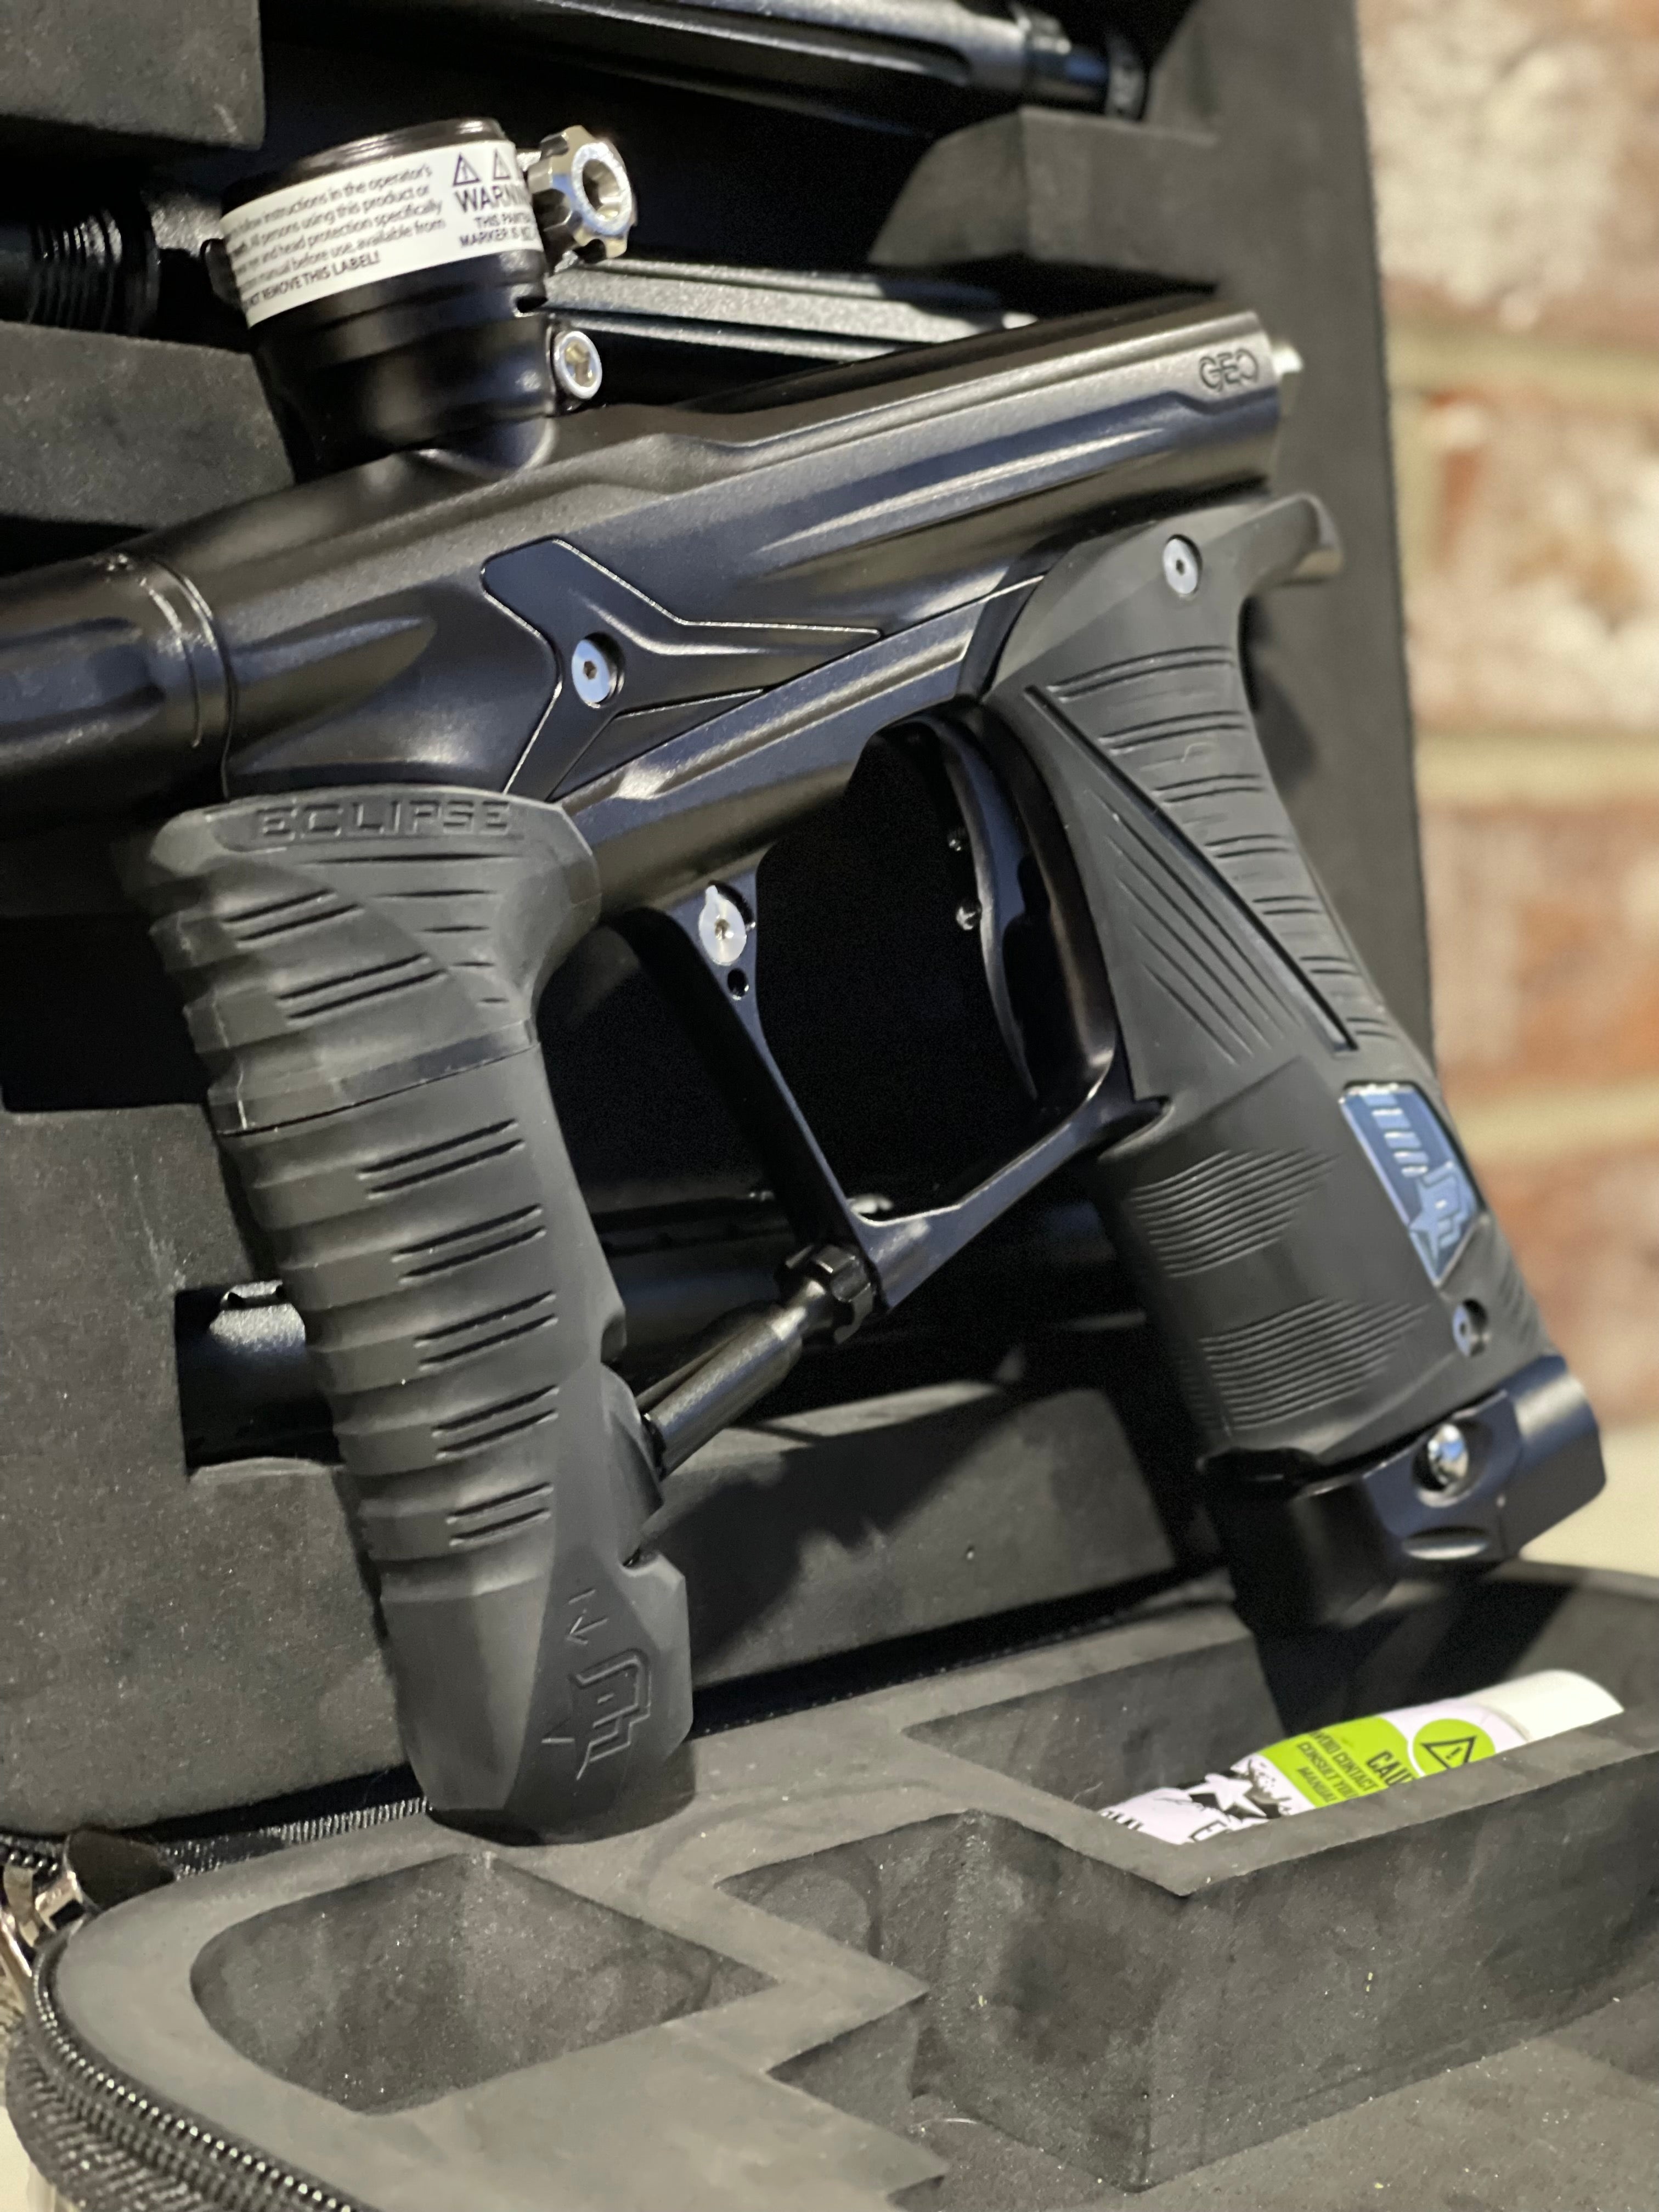 Used Planet Eclipse Geo 3.1 Paintball Gun - Midnight w/ 3 Barrel Back and Extra Barrel Tip